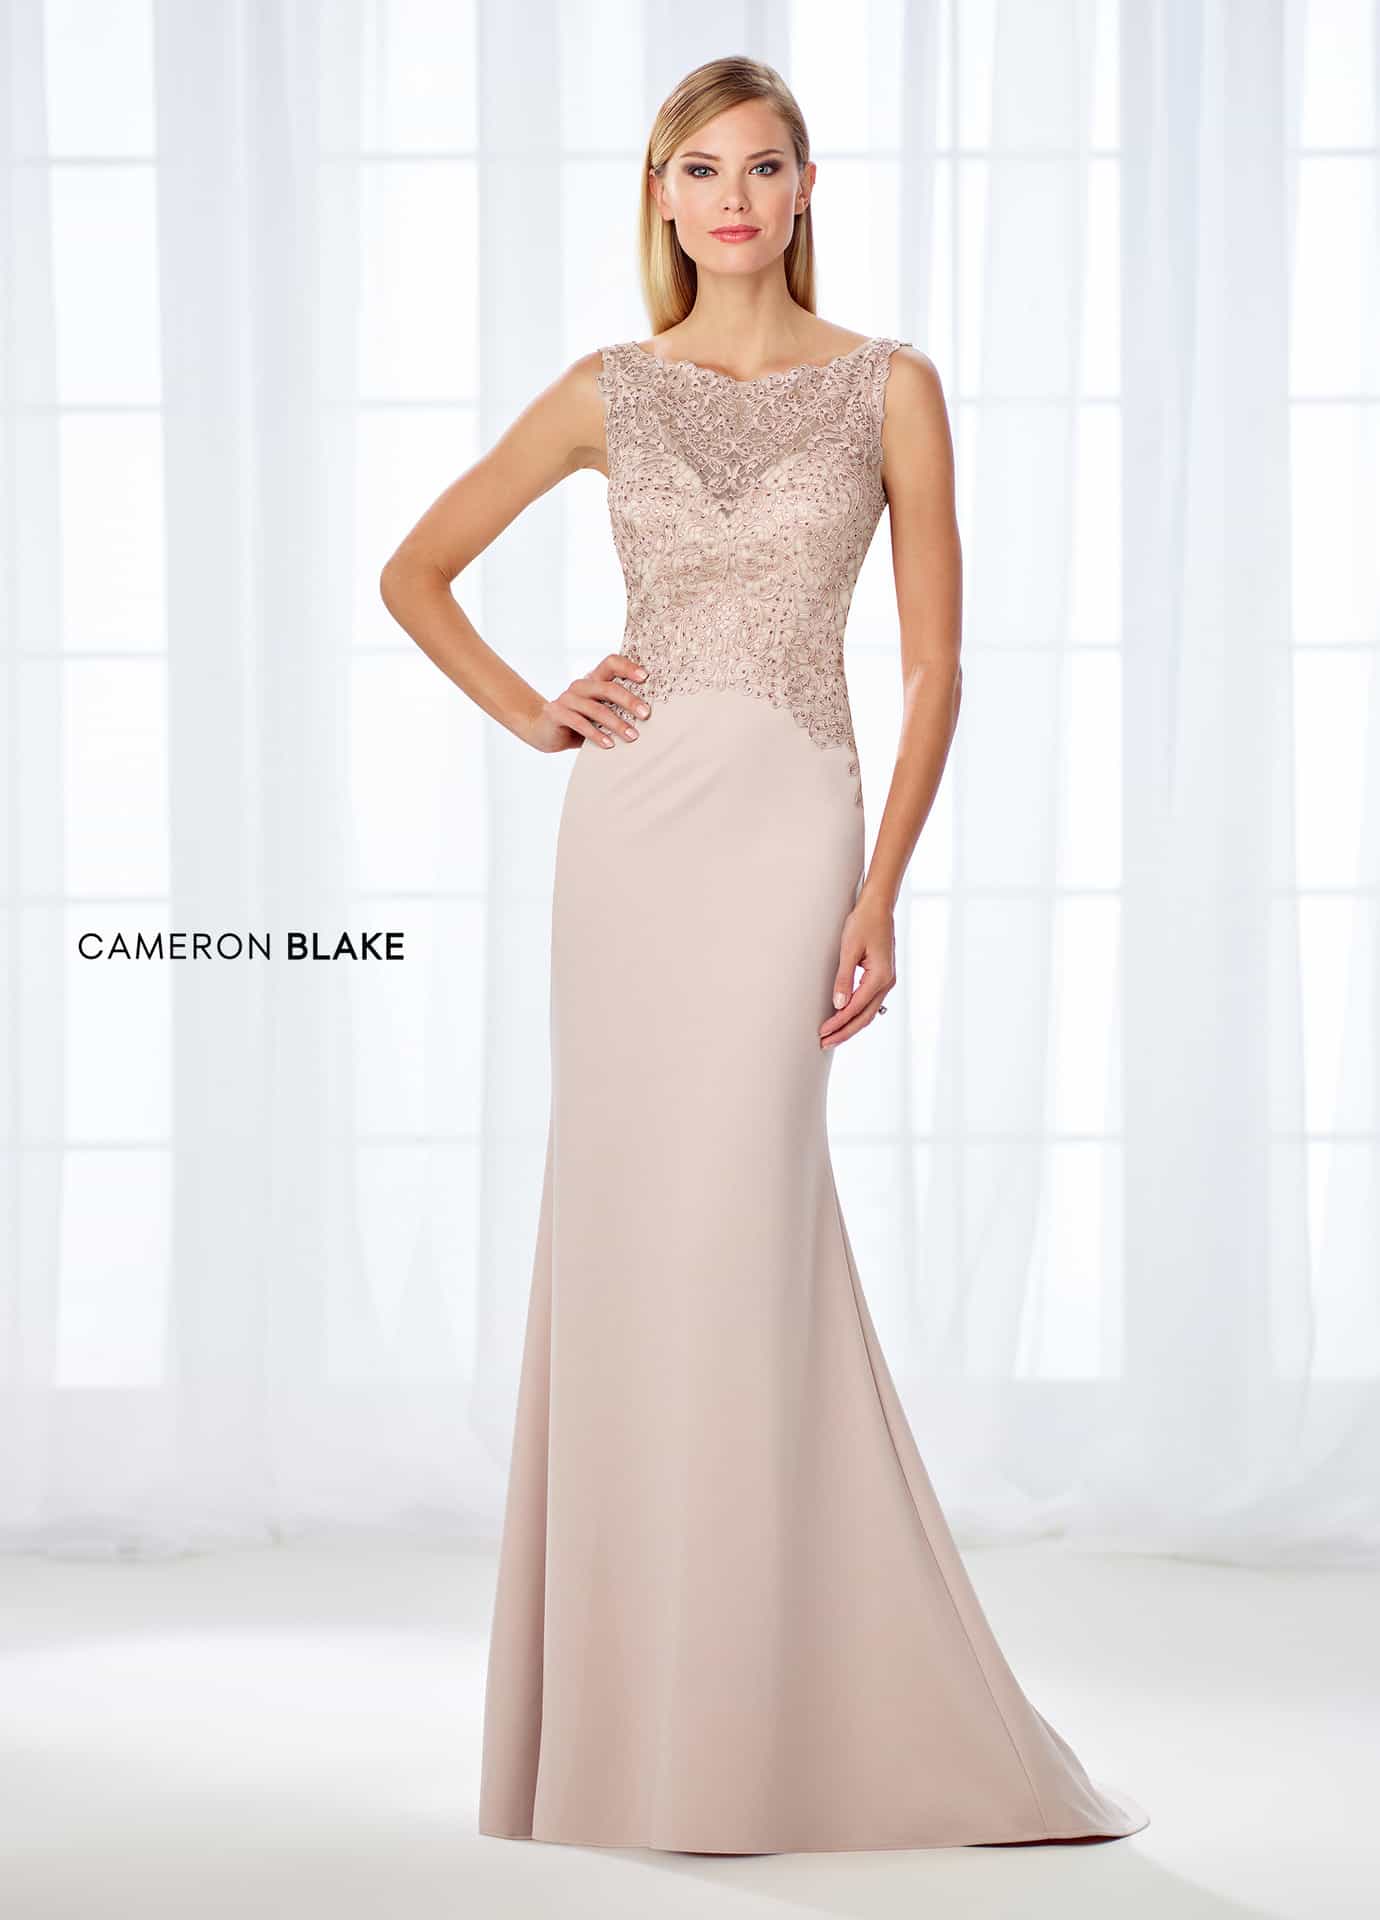 Full length dress with lace Bodice.